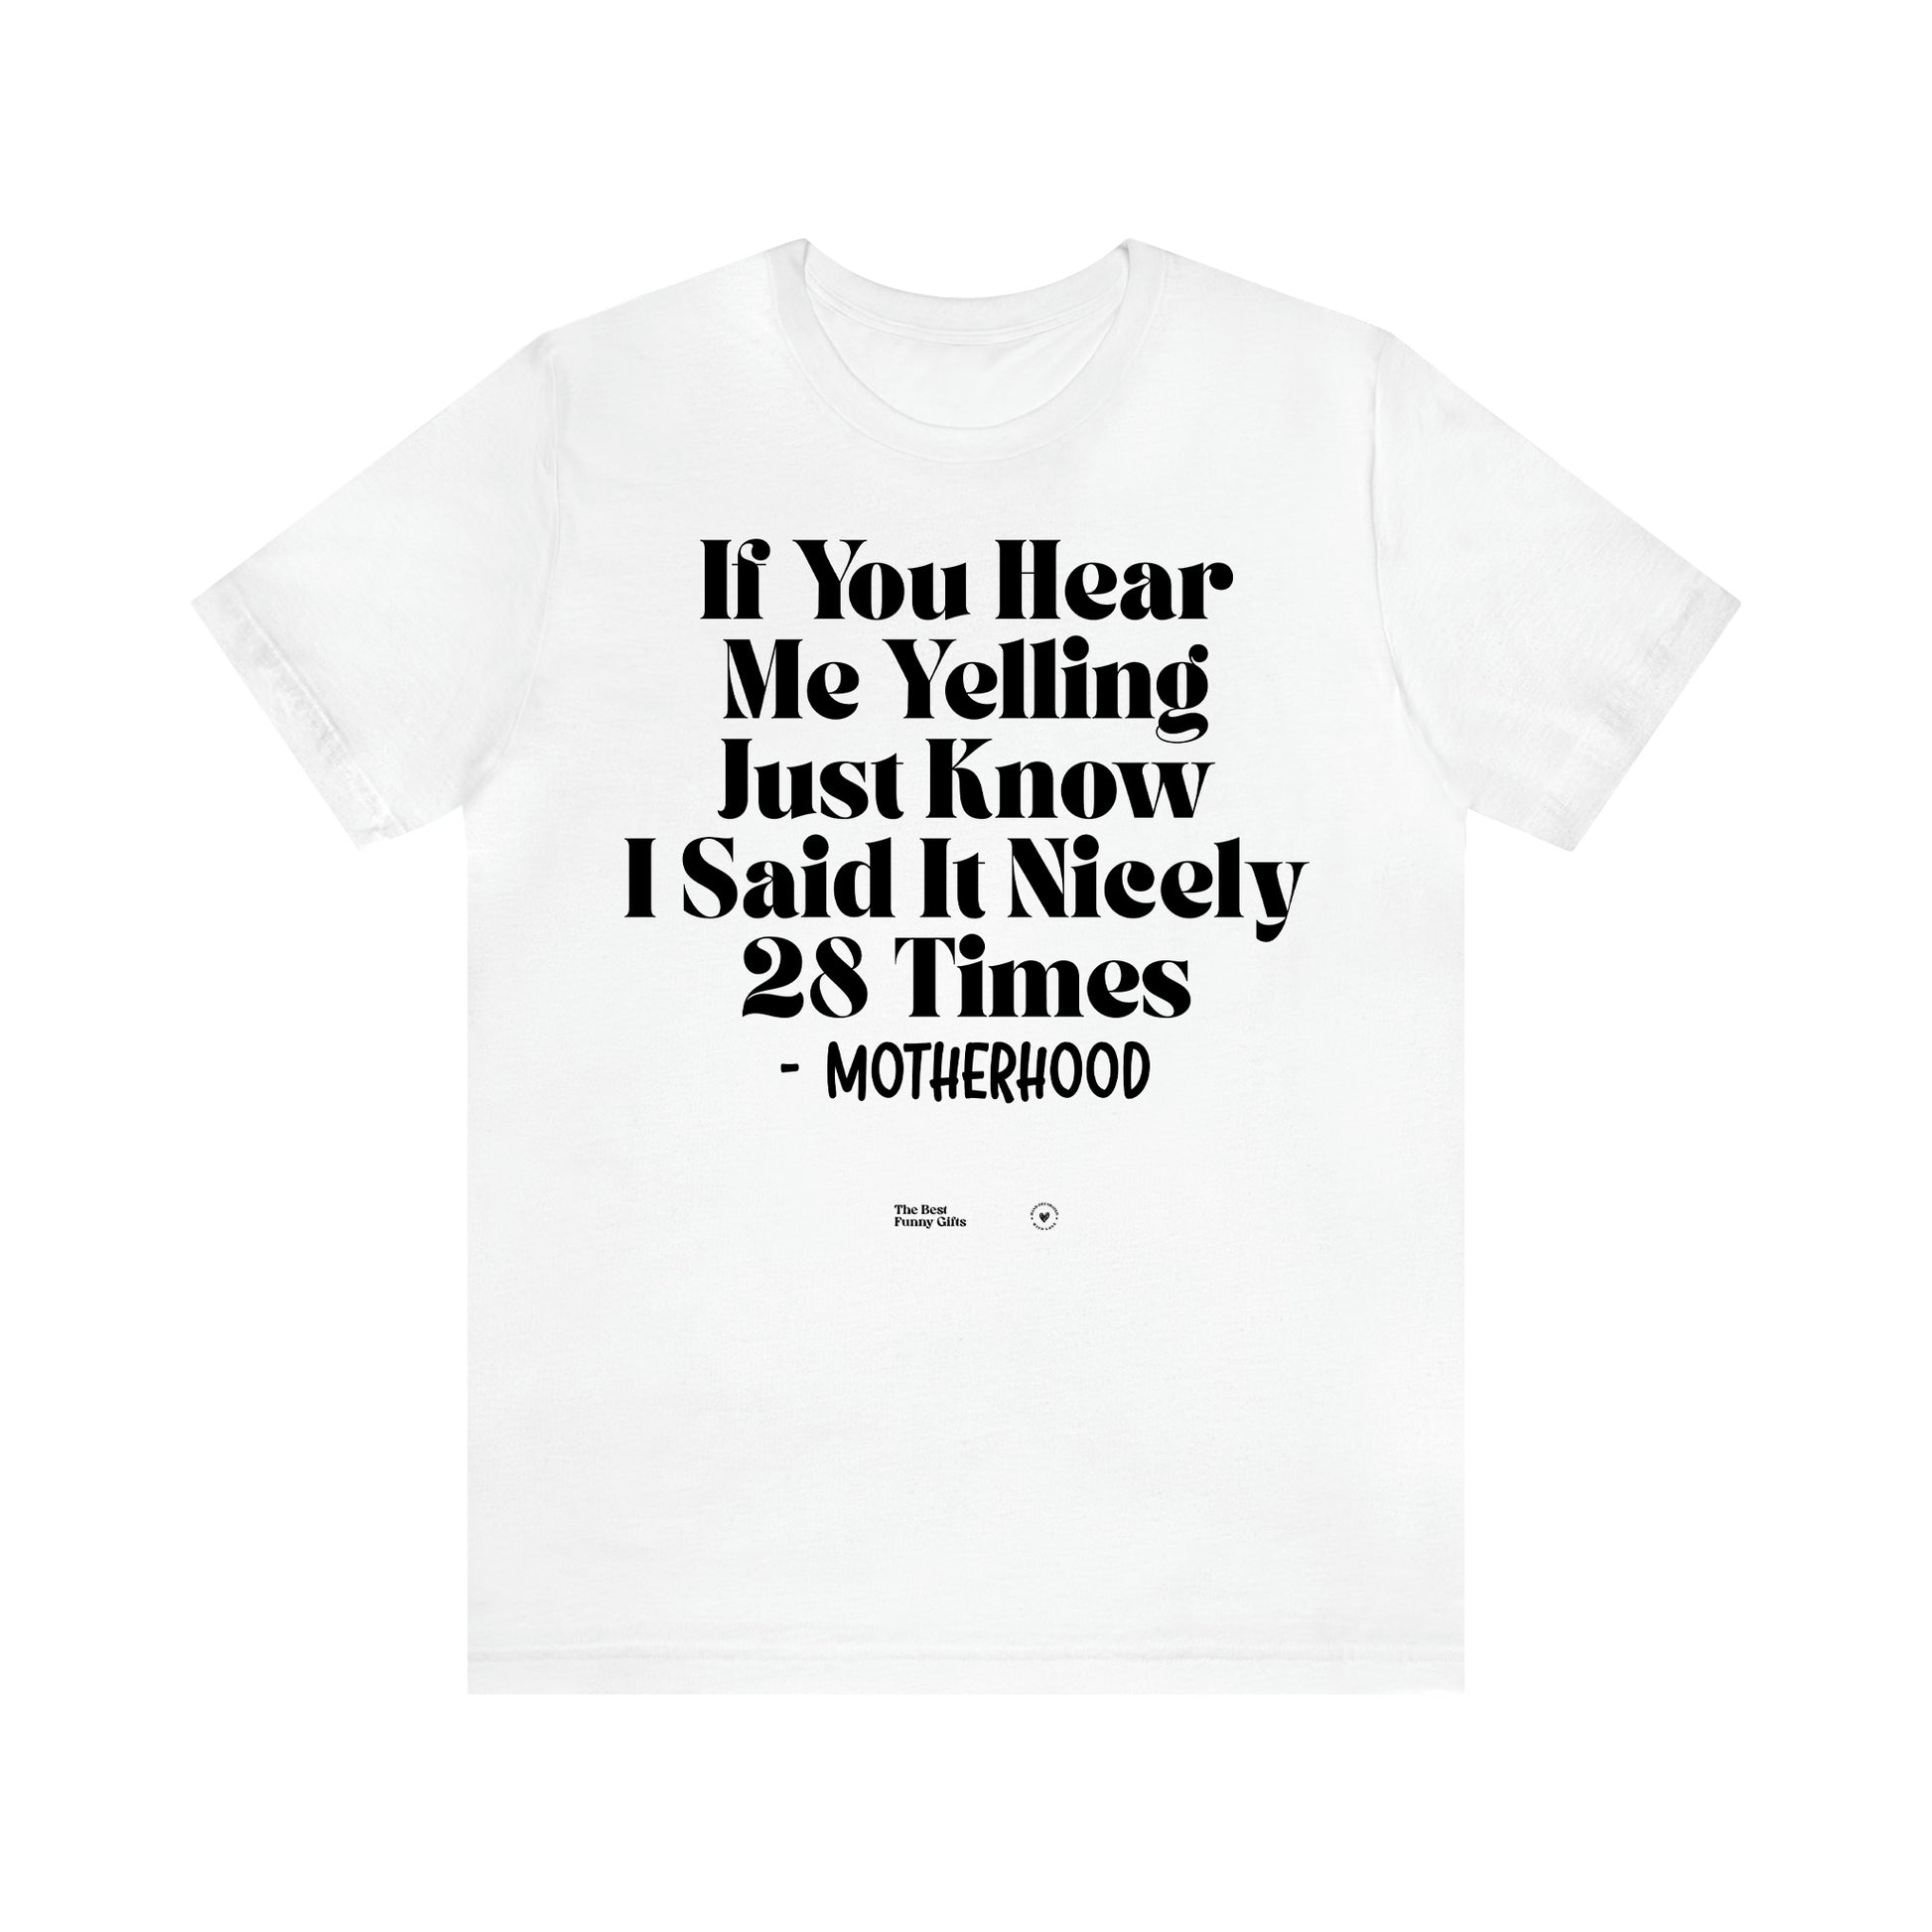 Women's T Shirts If You Hear Me Yelling Just Know I Said It Nicely 28 Times - Motherhood - The Best Funny Gifts